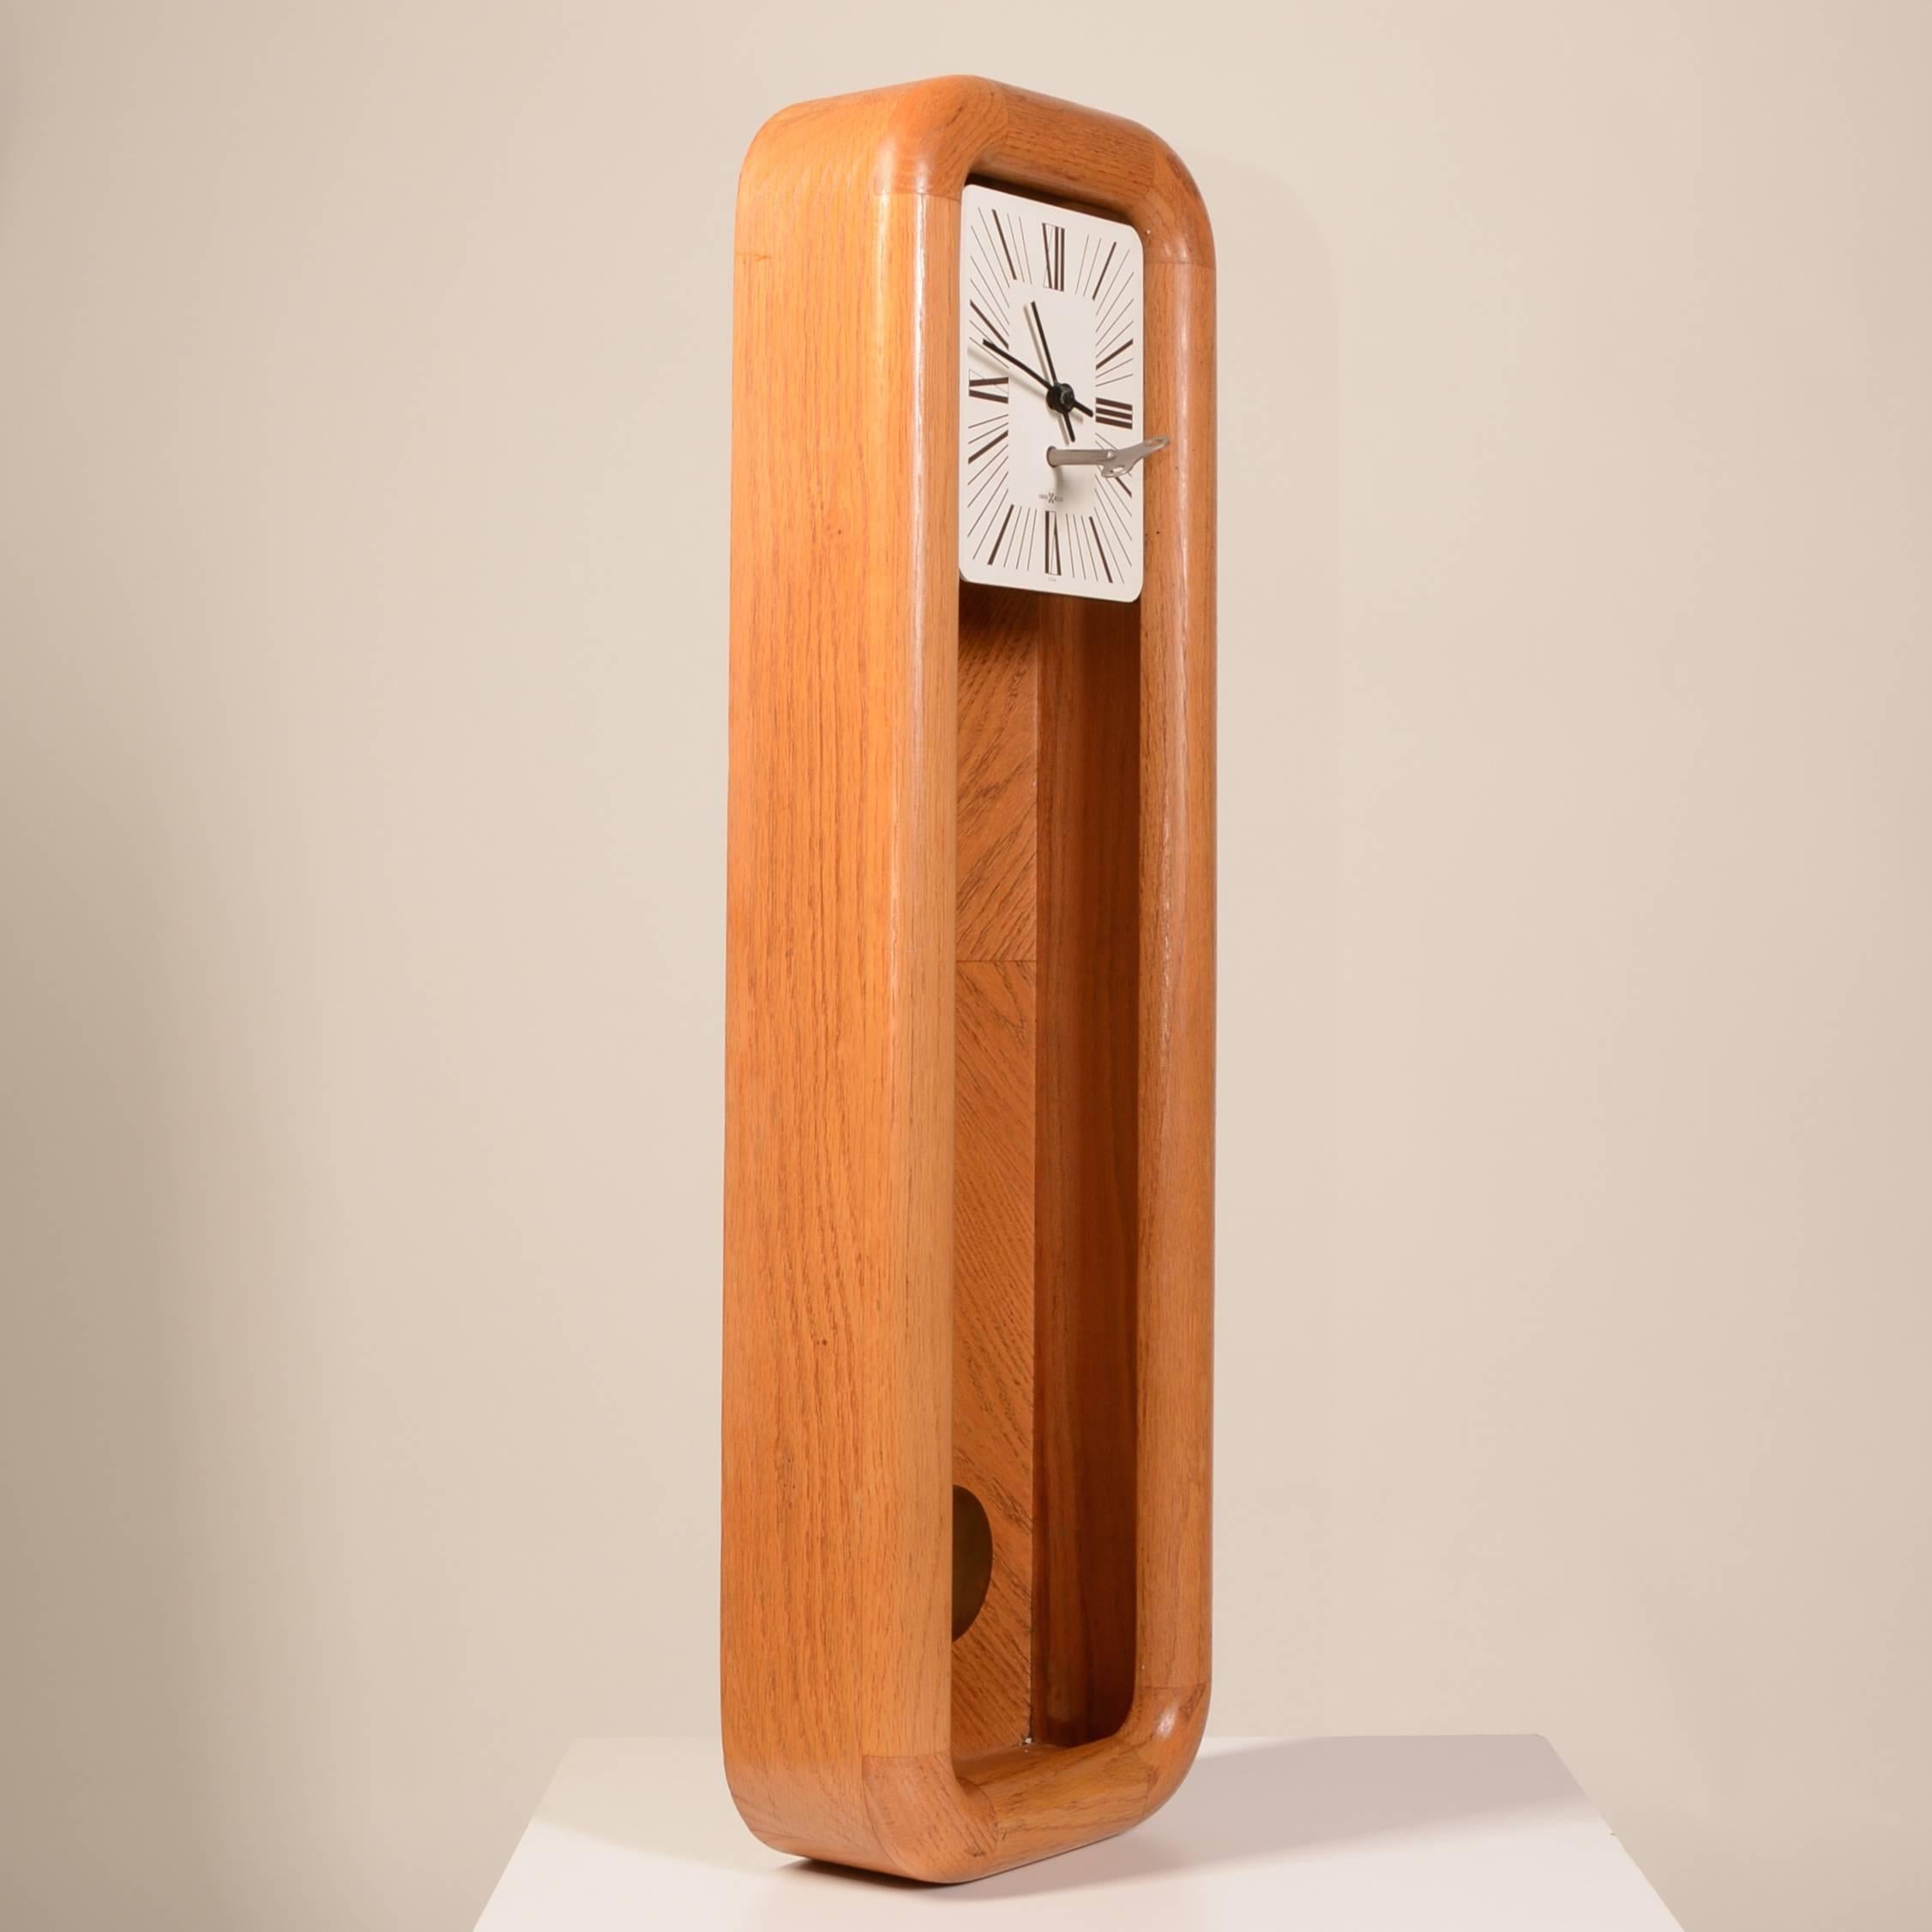 This is a solid oak circa 1975 Howard Miller mechanical pendulum wall clock. It is a model 612, has an 8-day winder and keeps excellent time. The case is a beautiful, heavy gleaming oak and the hands are made of metal. The pendulum is brass and the